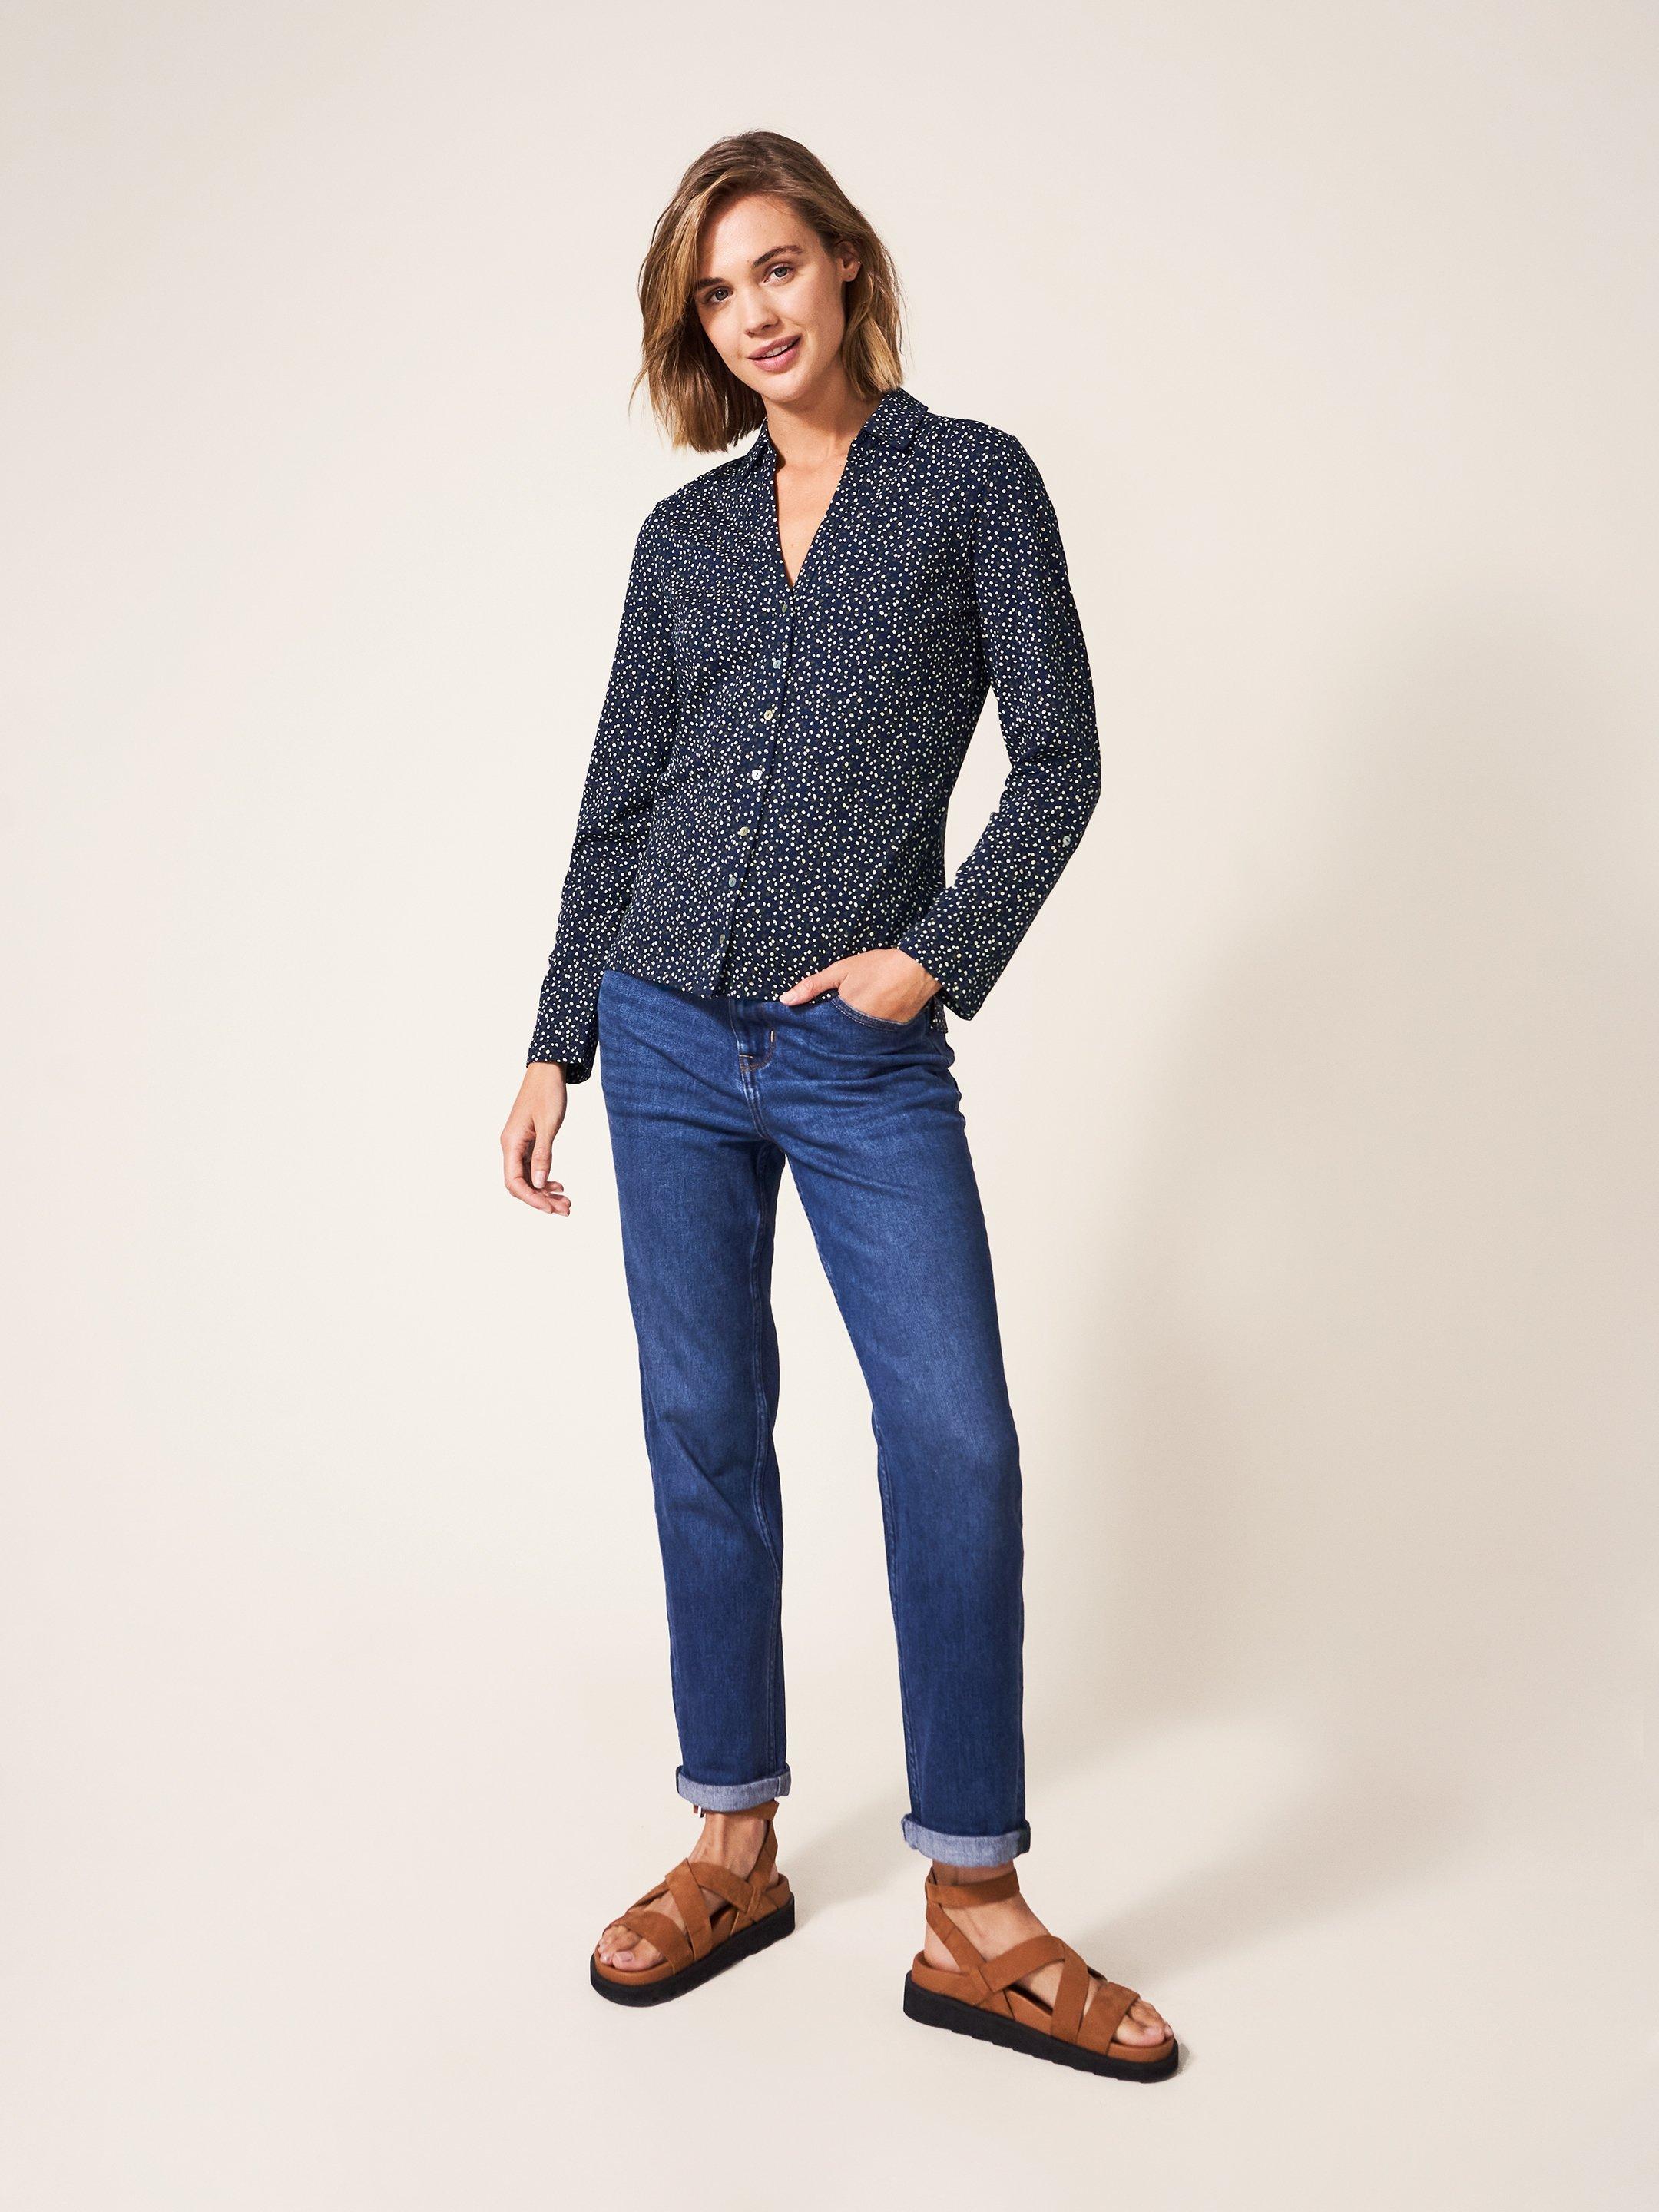 Annie Printed Jersey Shirt in NAVY MULTI - MODEL FRONT